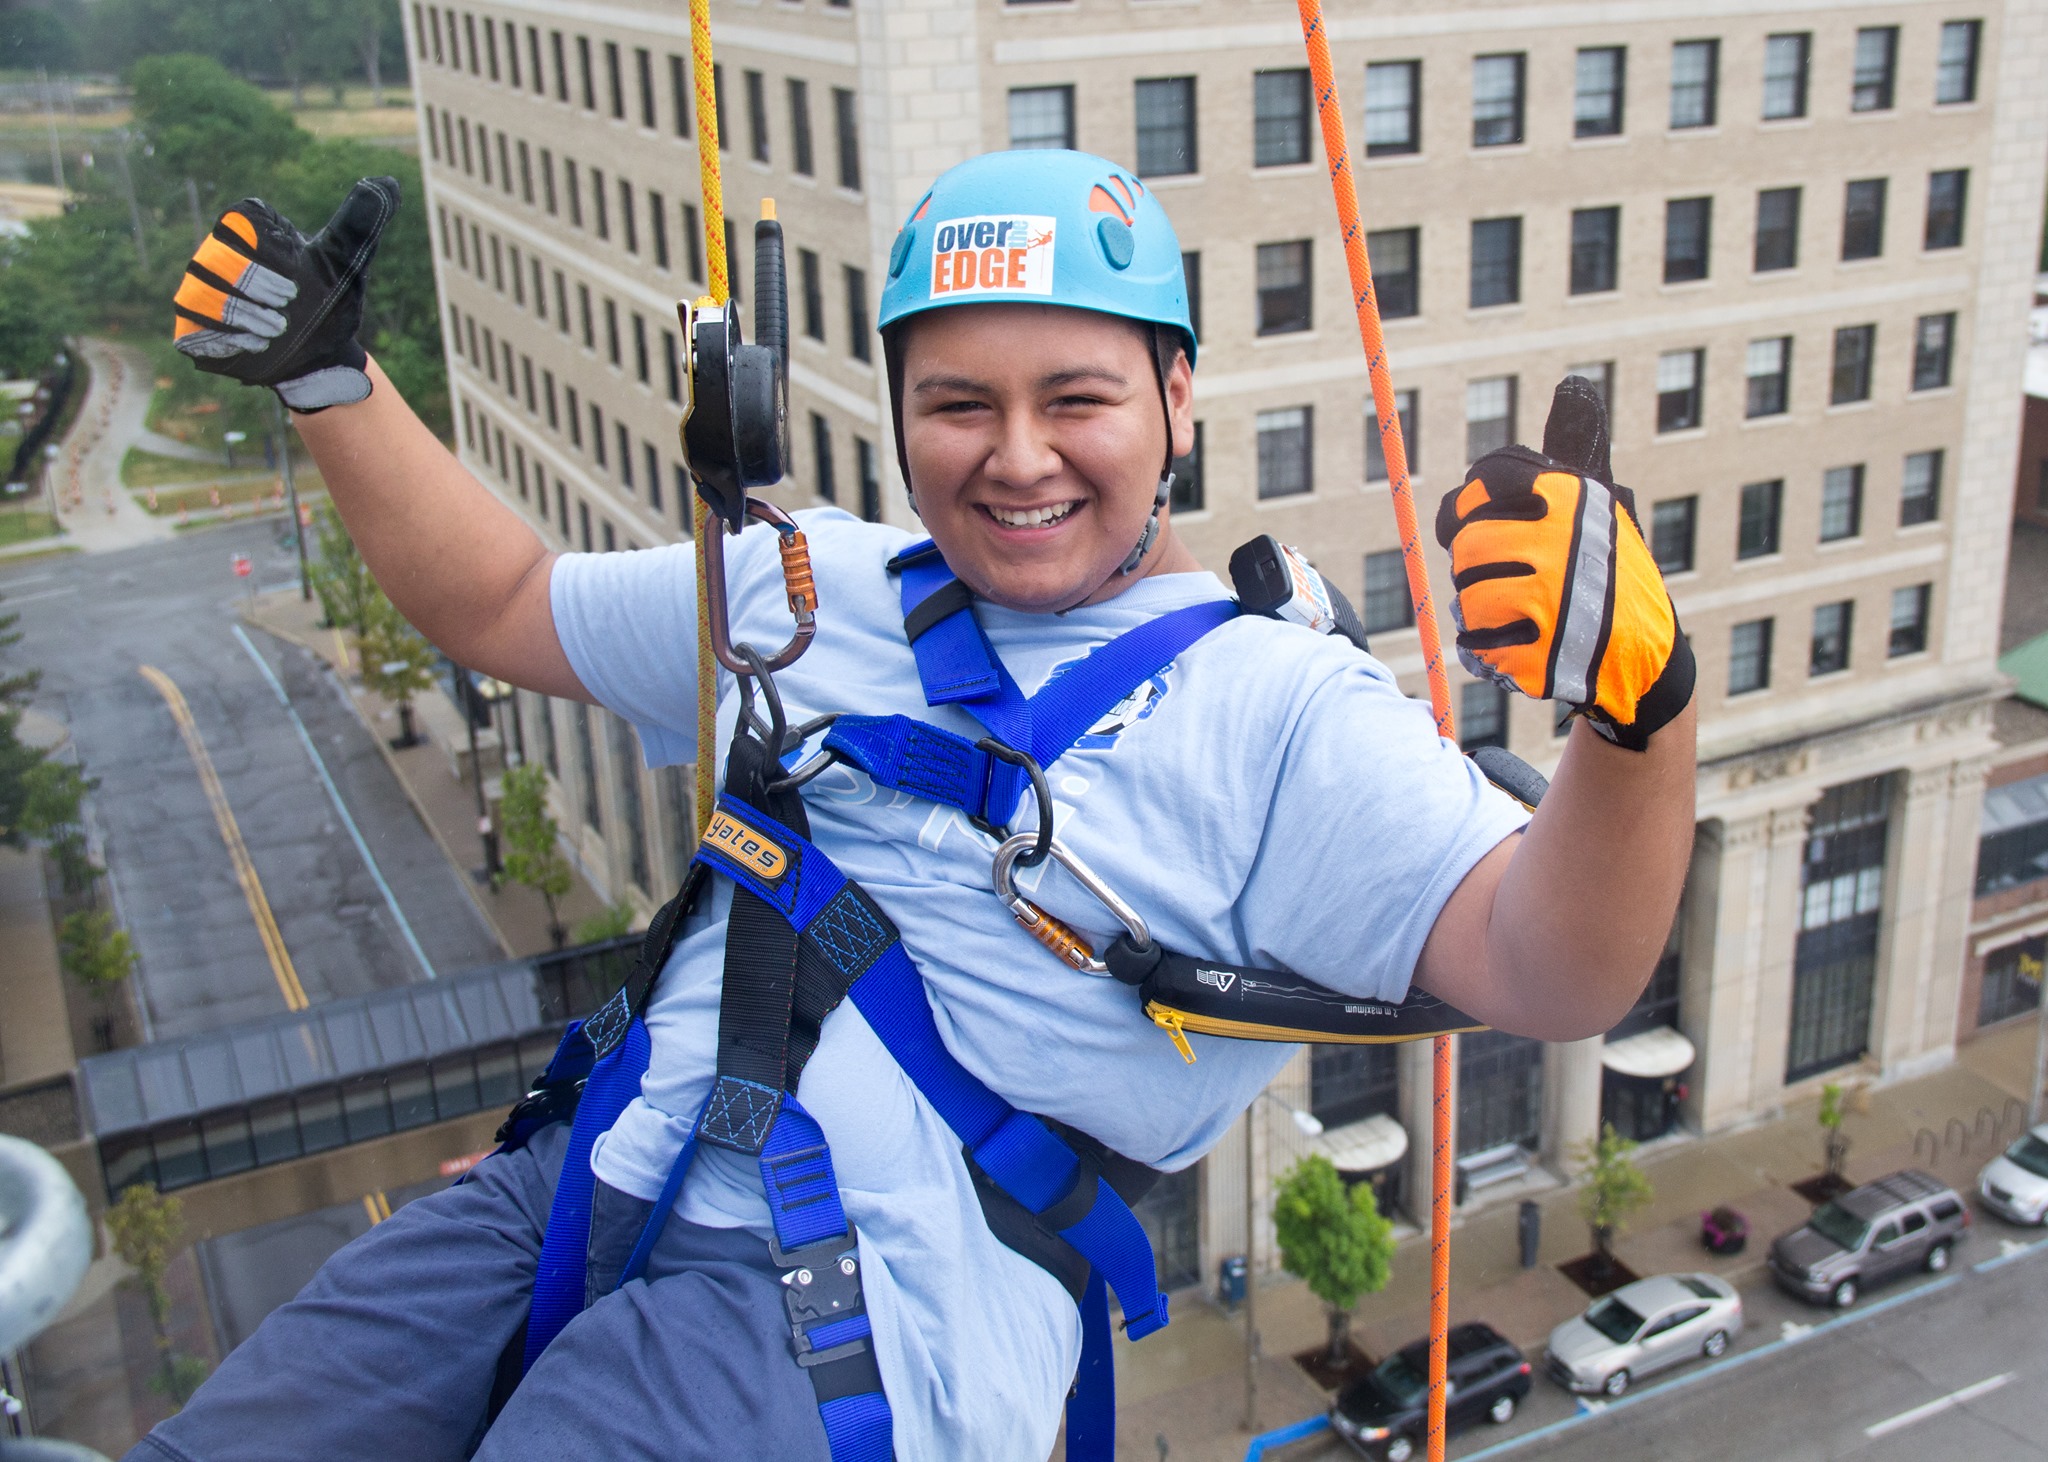 A young person grins, holding two thumbs up at the camera before they go Over the Edge.